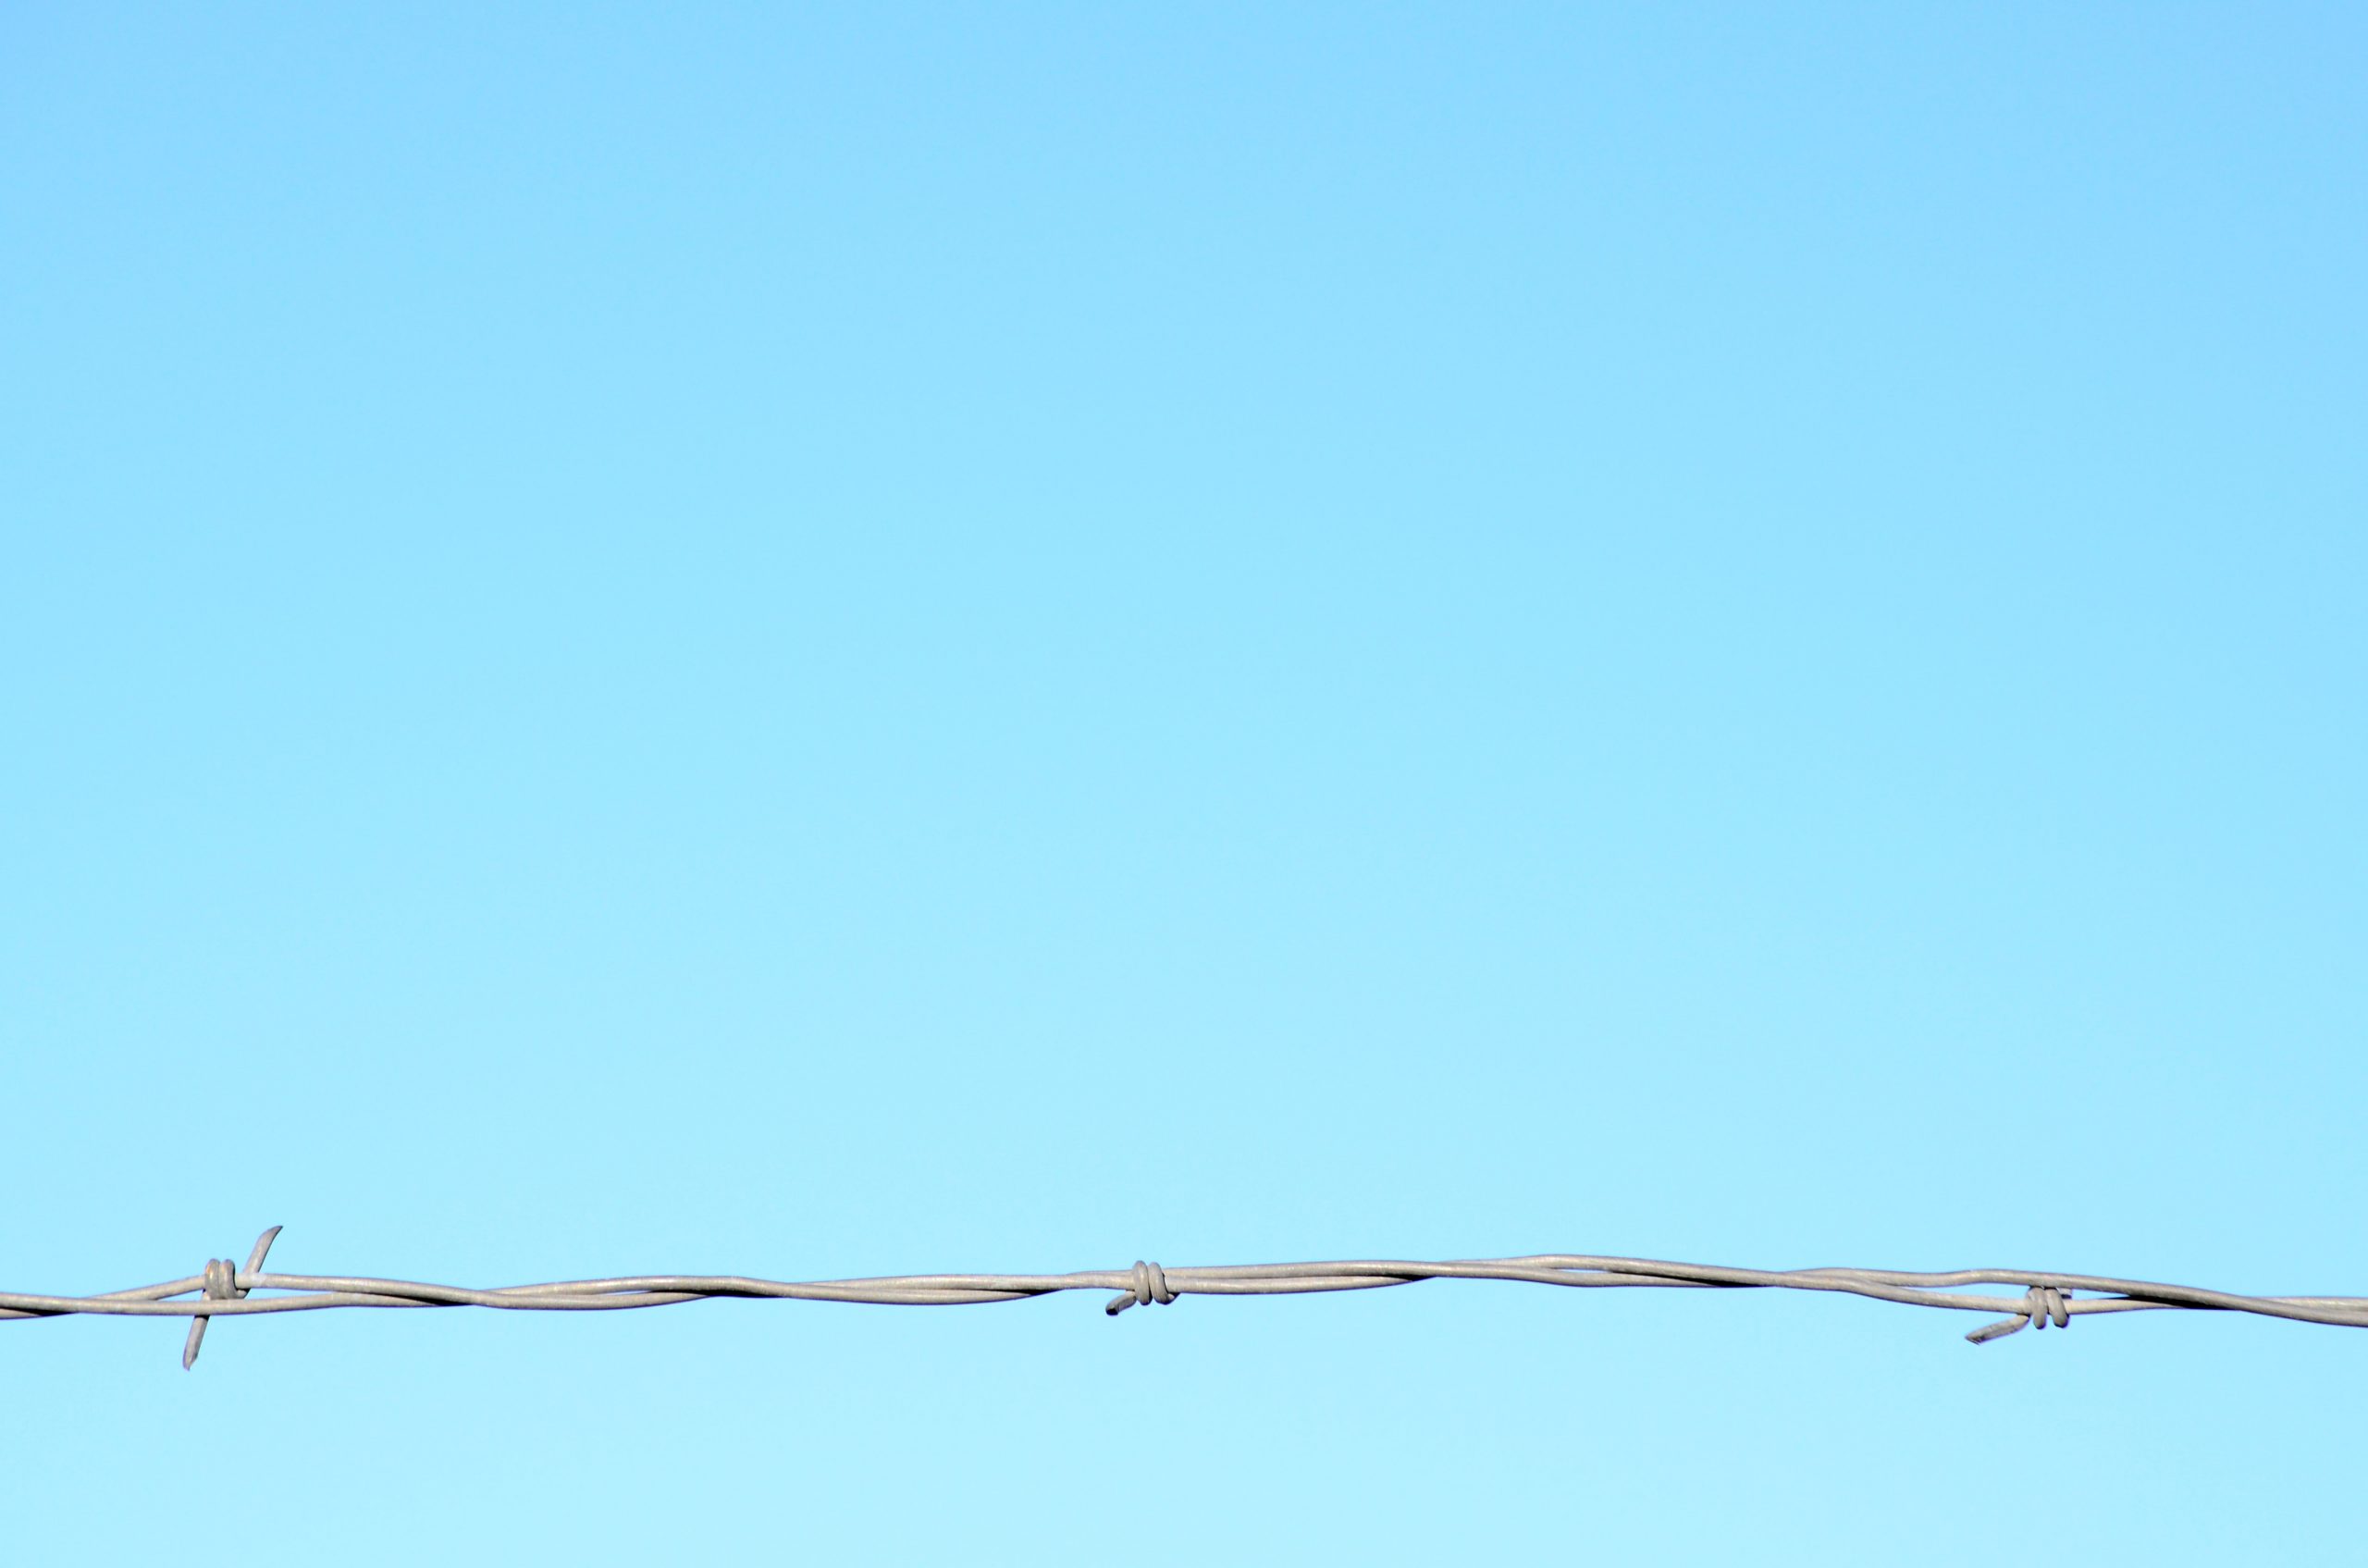 Close-up of razor wire against a clear blue sky